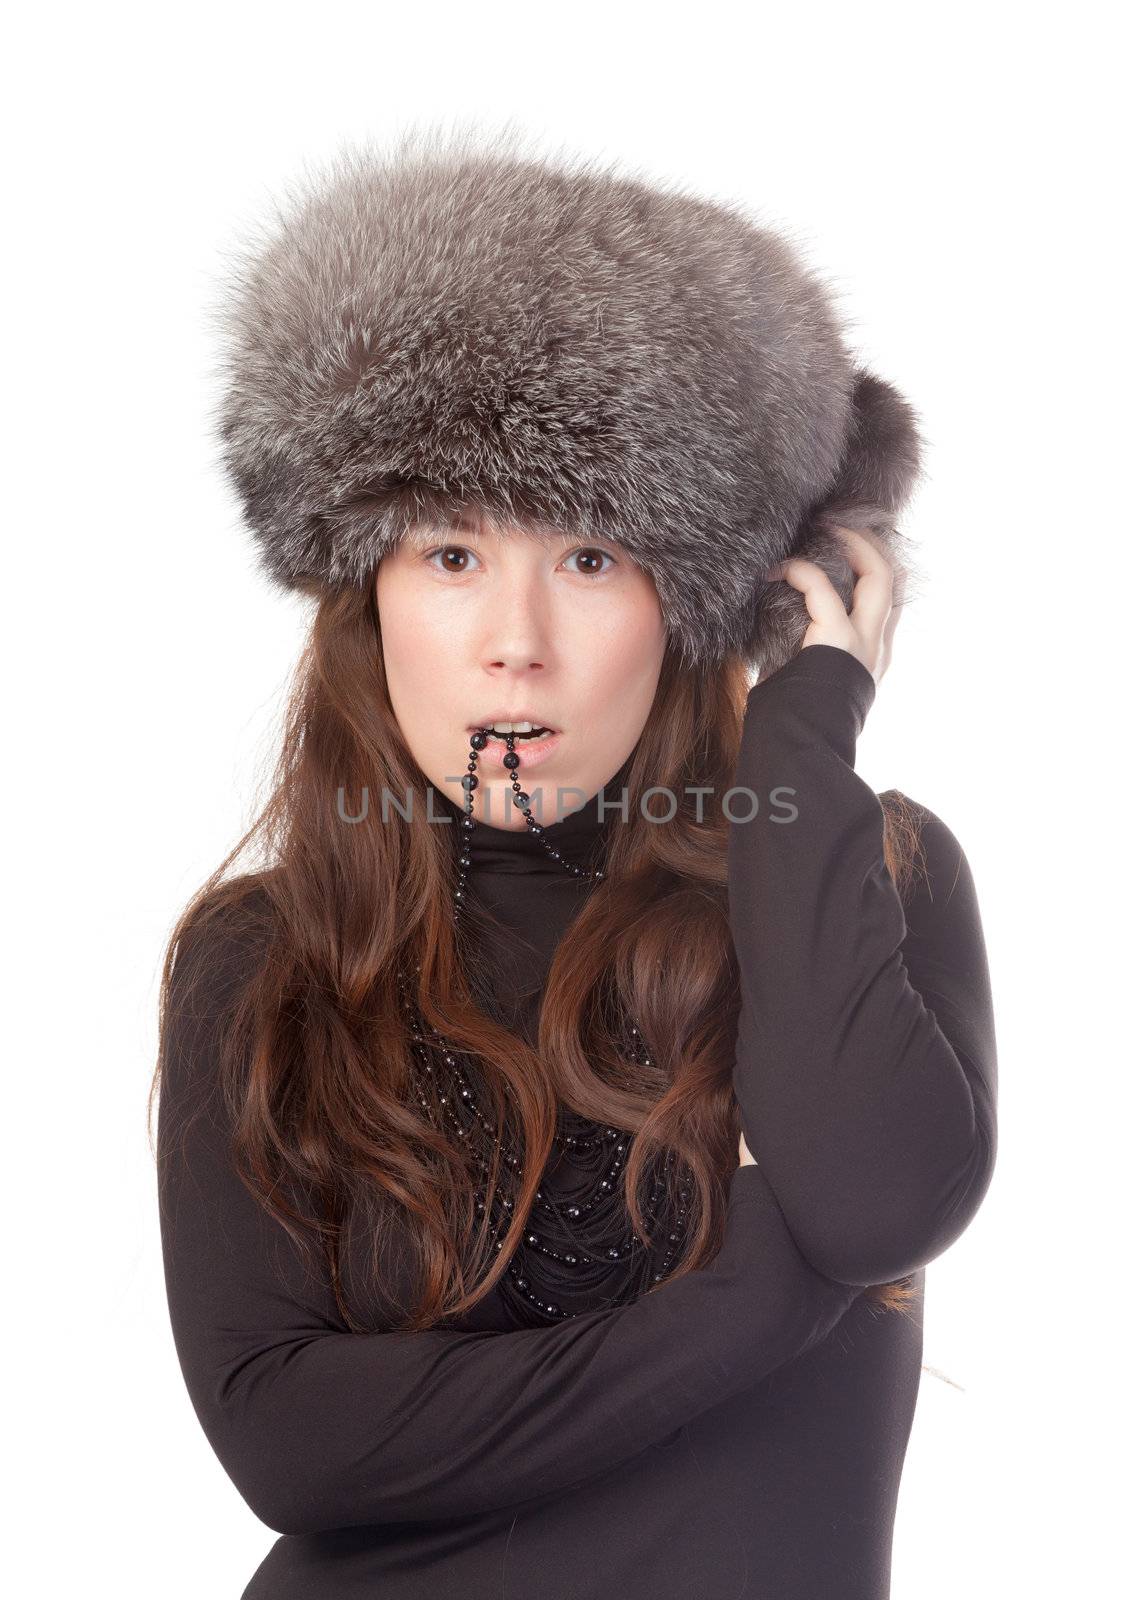 Vivacious woman in winter outfit by Discovod